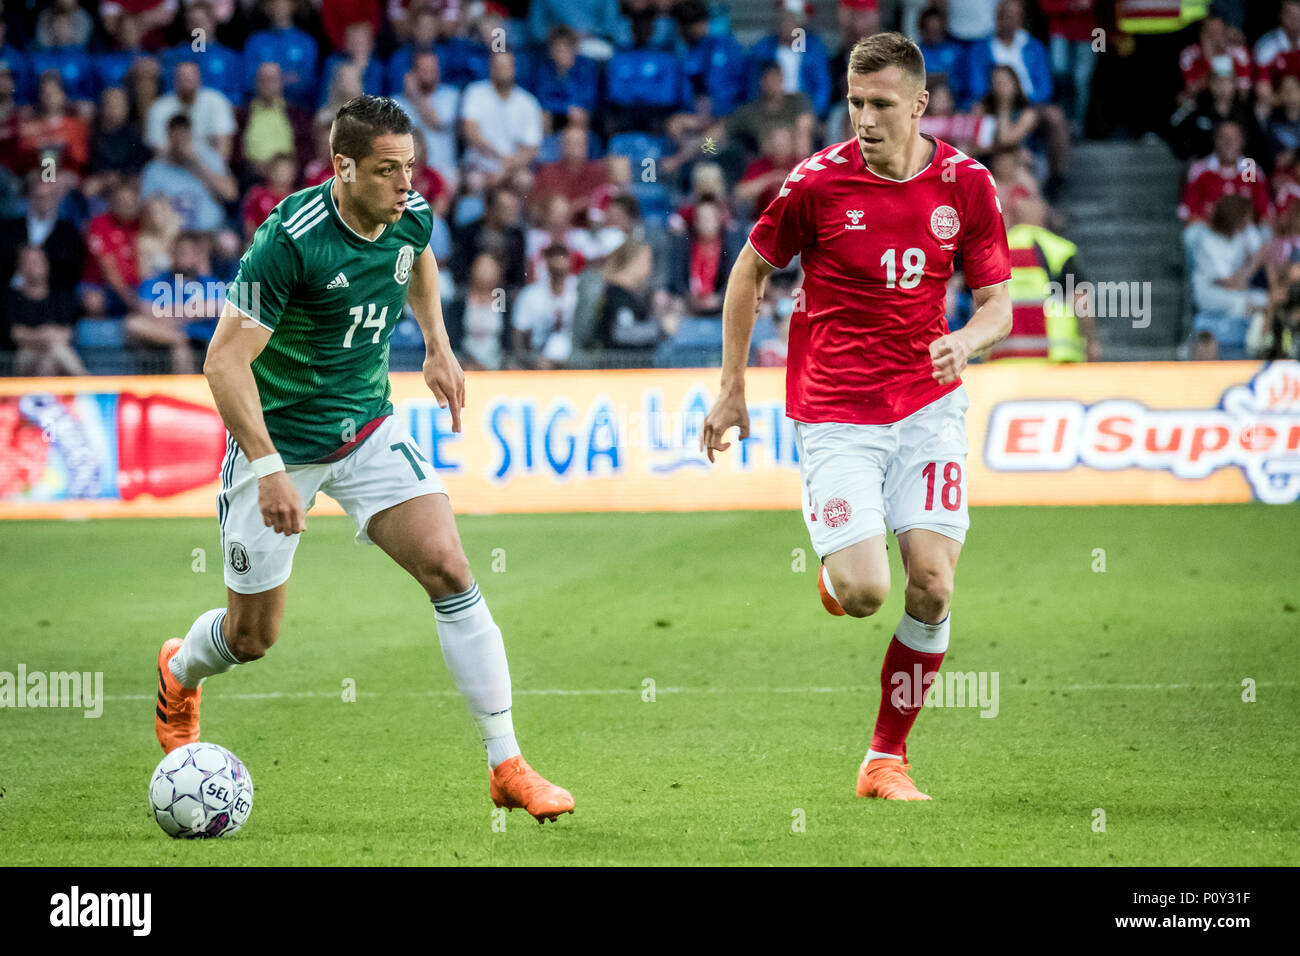 Denmark, Brøndby - June 09, 2018. Javier Hernandez (14) of Mexico and Lukas Lerager (18) of Denmark seen during the football friendly between Denmark and Mexico at Brøndby Stadion. (Photo credit: Gonzales Photo - Kim M. Leland). Credit: Gonzales Photo/Alamy Live News Stock Photo